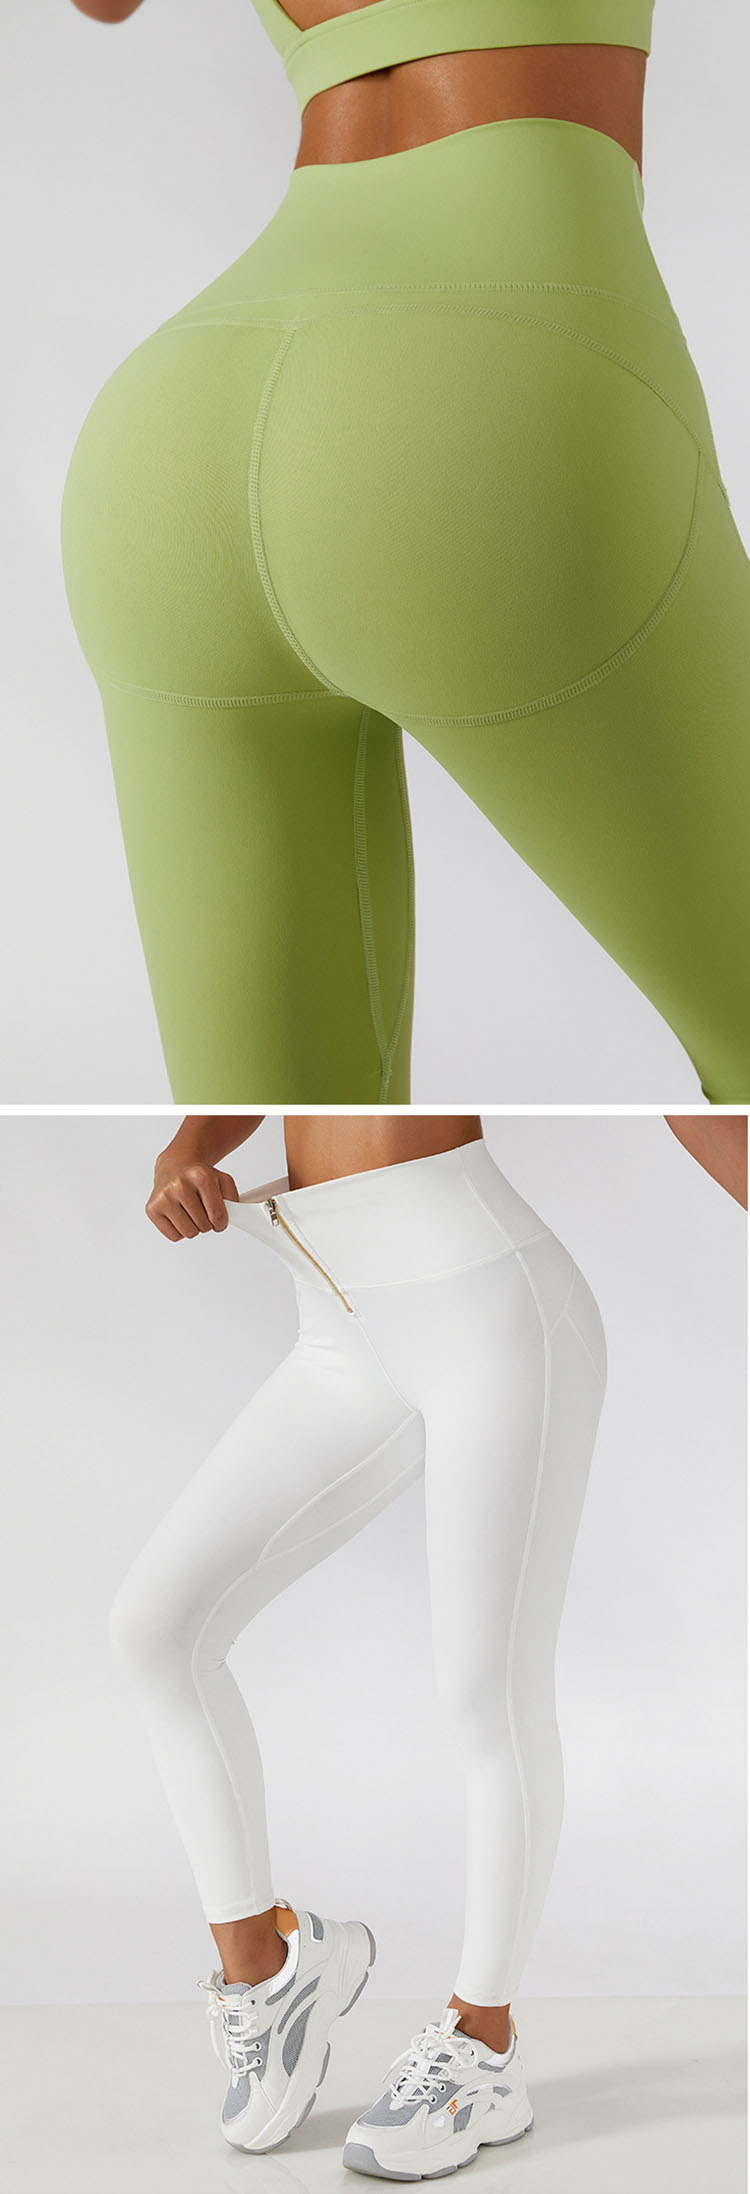 leggings have gradually become a concave shape weapon